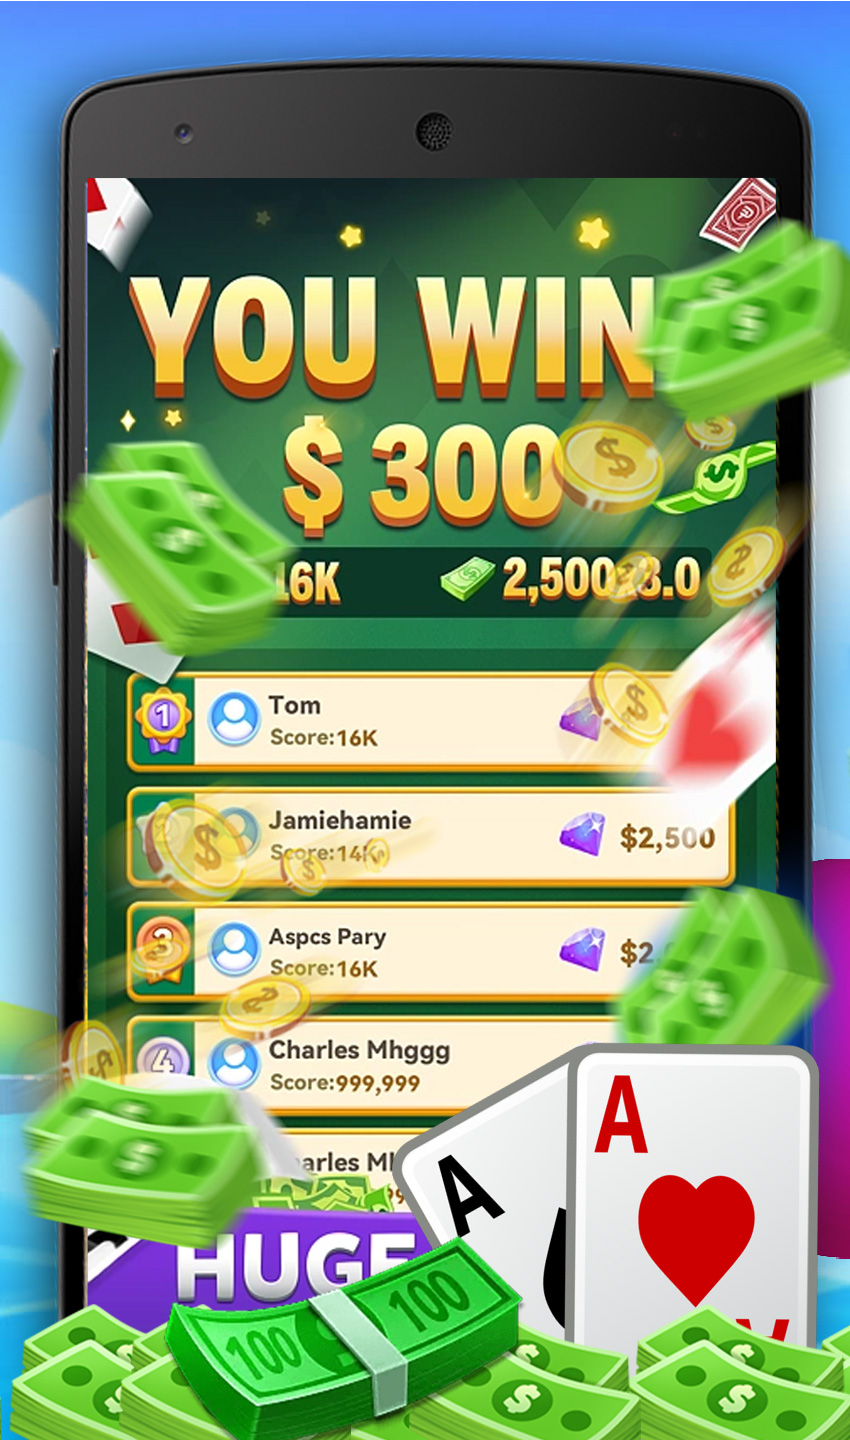 Solitaire Cash: Win Real Money Playing A Skills Based Game